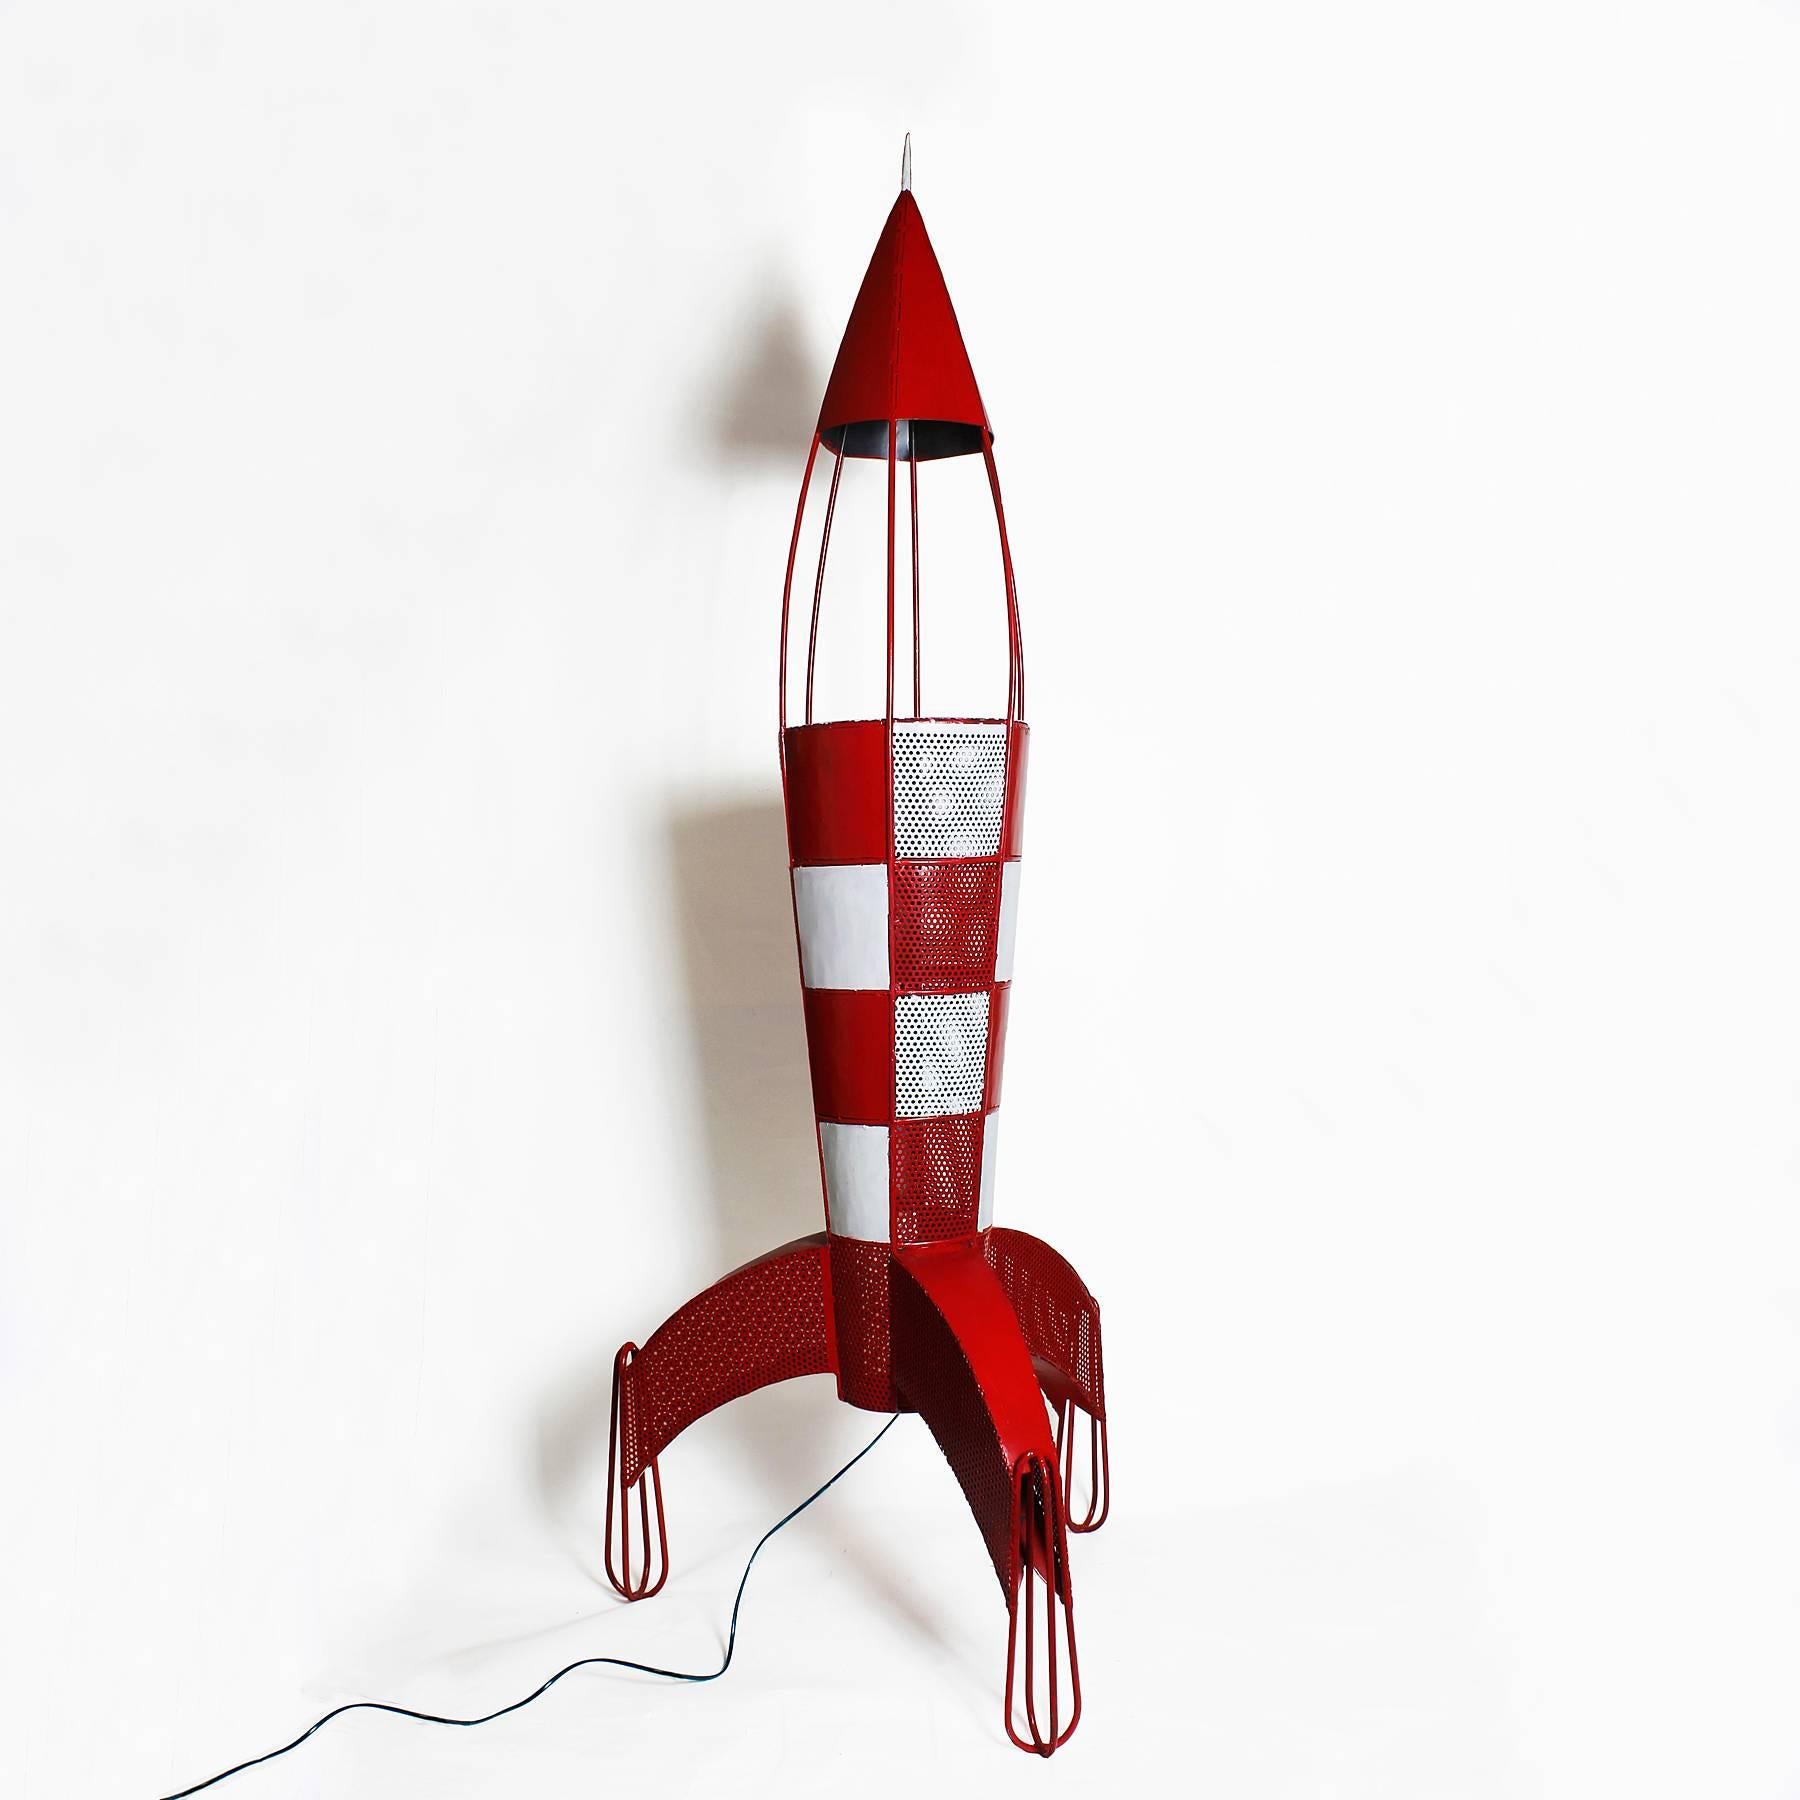 Standing lamp, replica of the space rocket, created by Hergé for the 